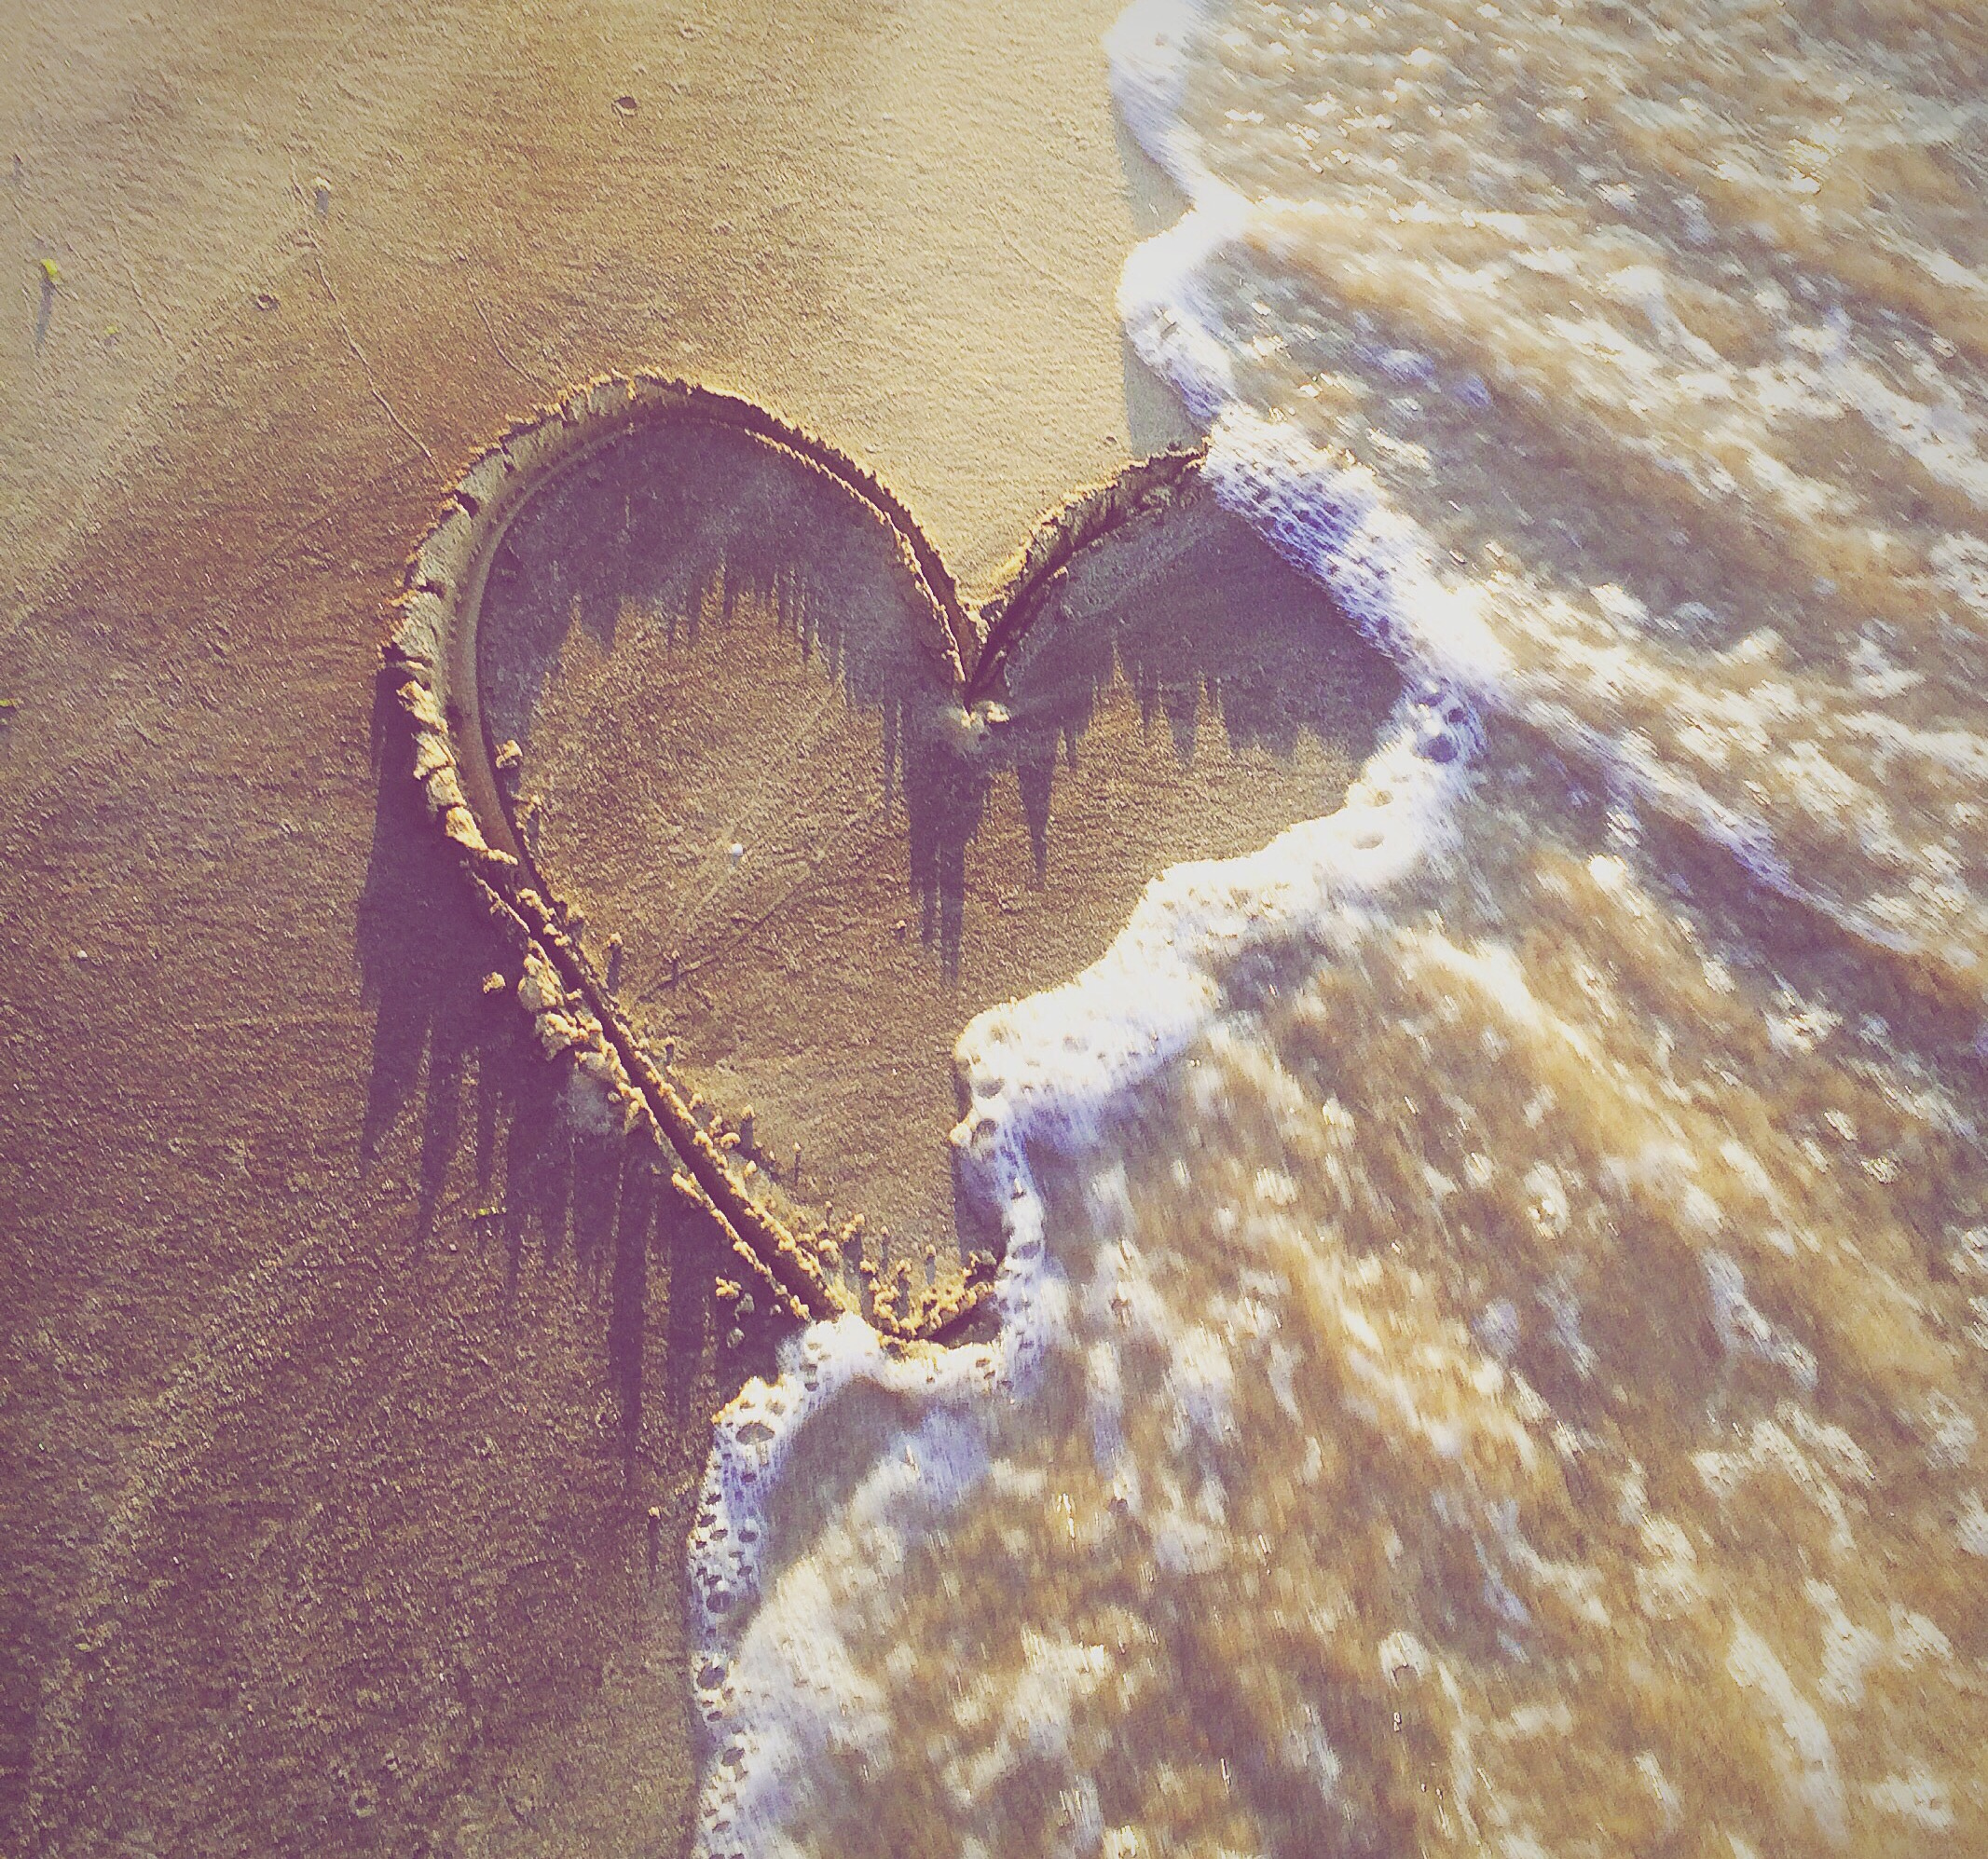 Heart drawn in the sand